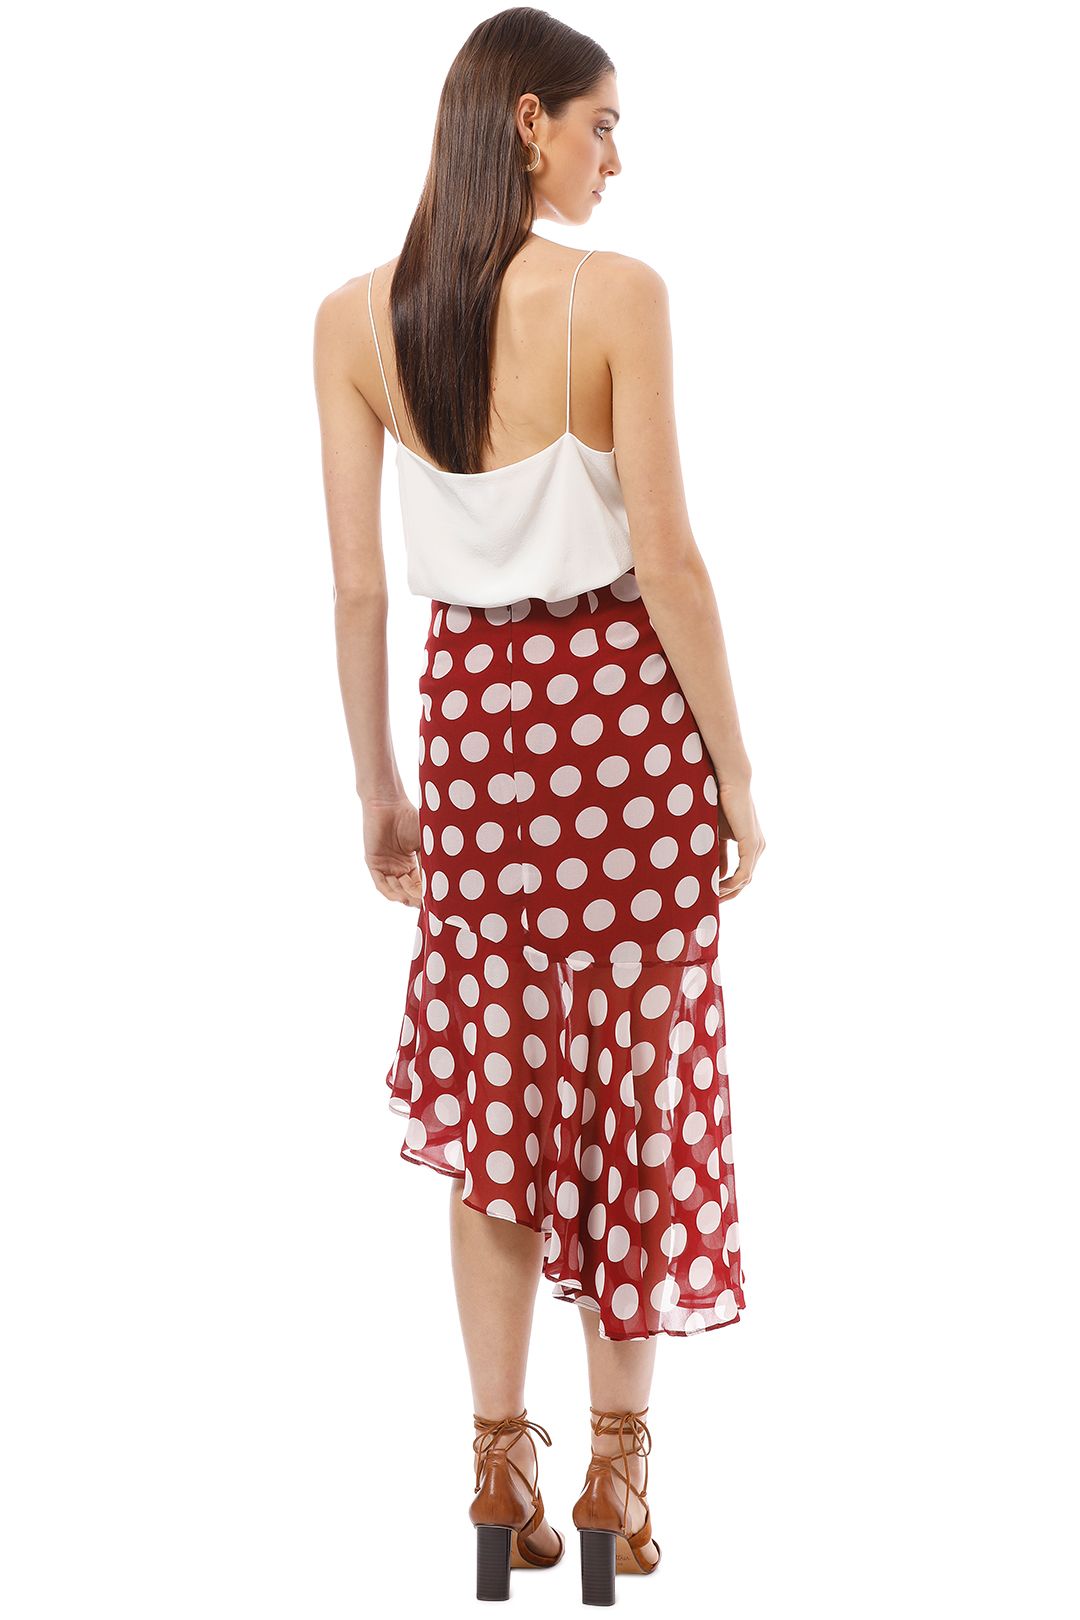 CMEO Collective - Unending Skirt - Red - Back